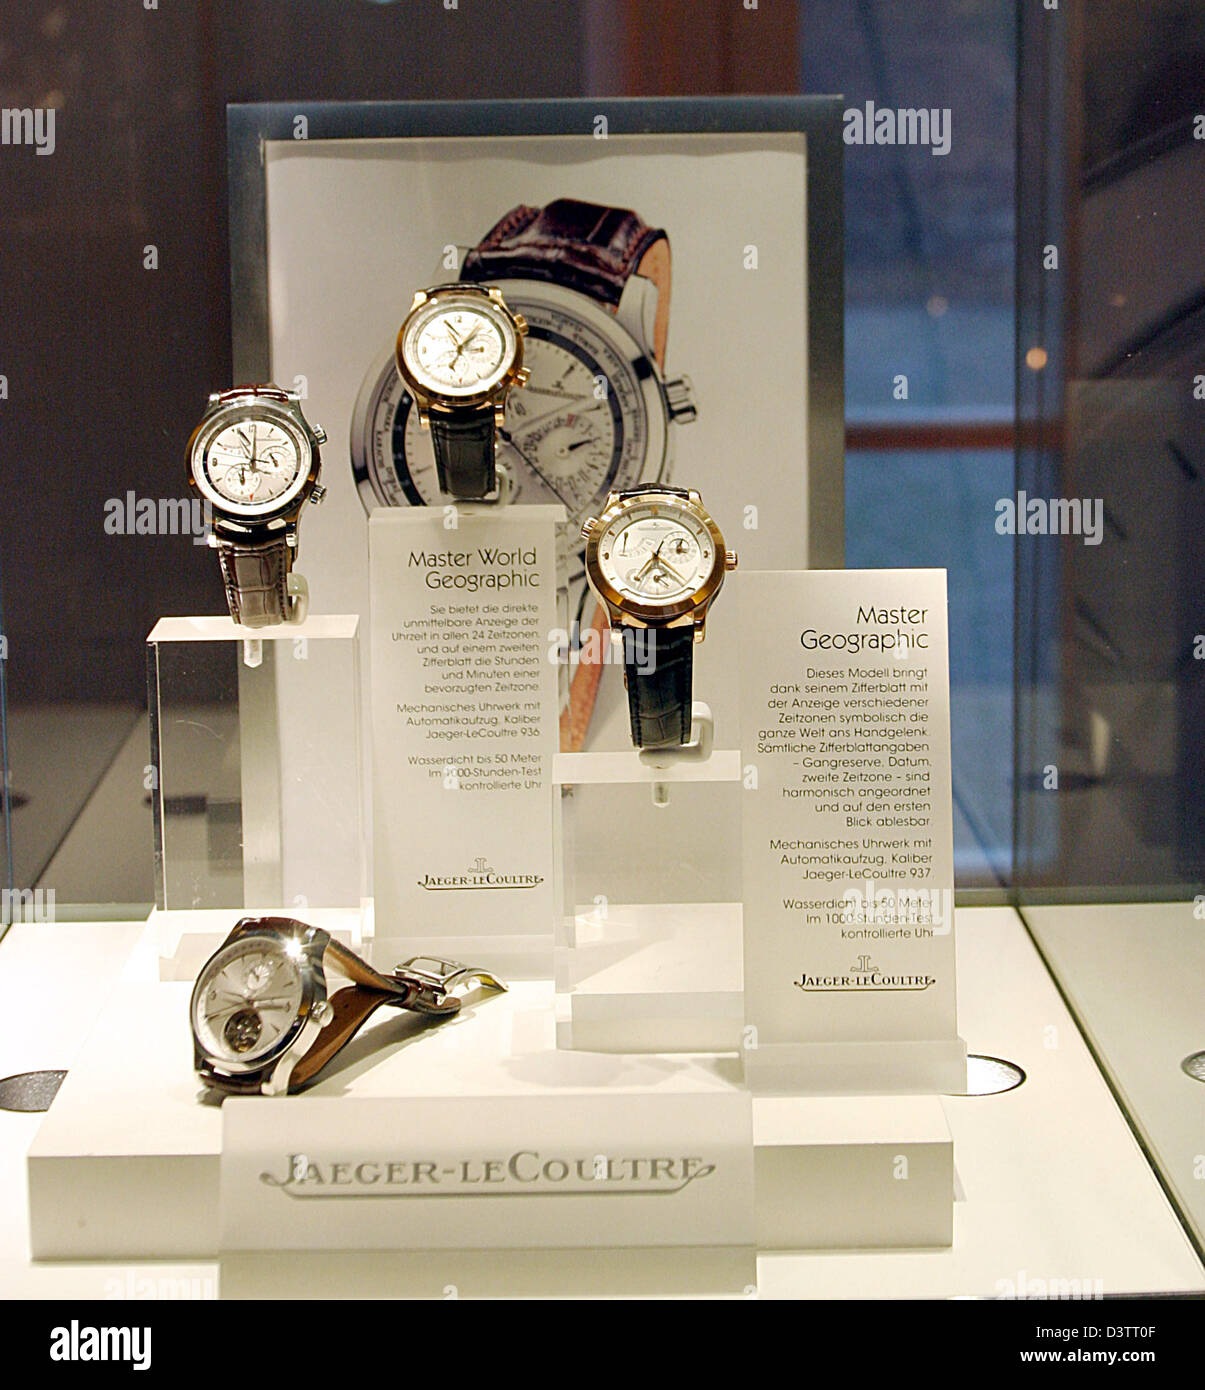 The picture shows the logo and watches of Swiss watch manufacturer  'Jaeger-Le Coultre' in Berlin, Germany, Sunday, 05 November 2006. Photo:  Xamax Stock Photo - Alamy